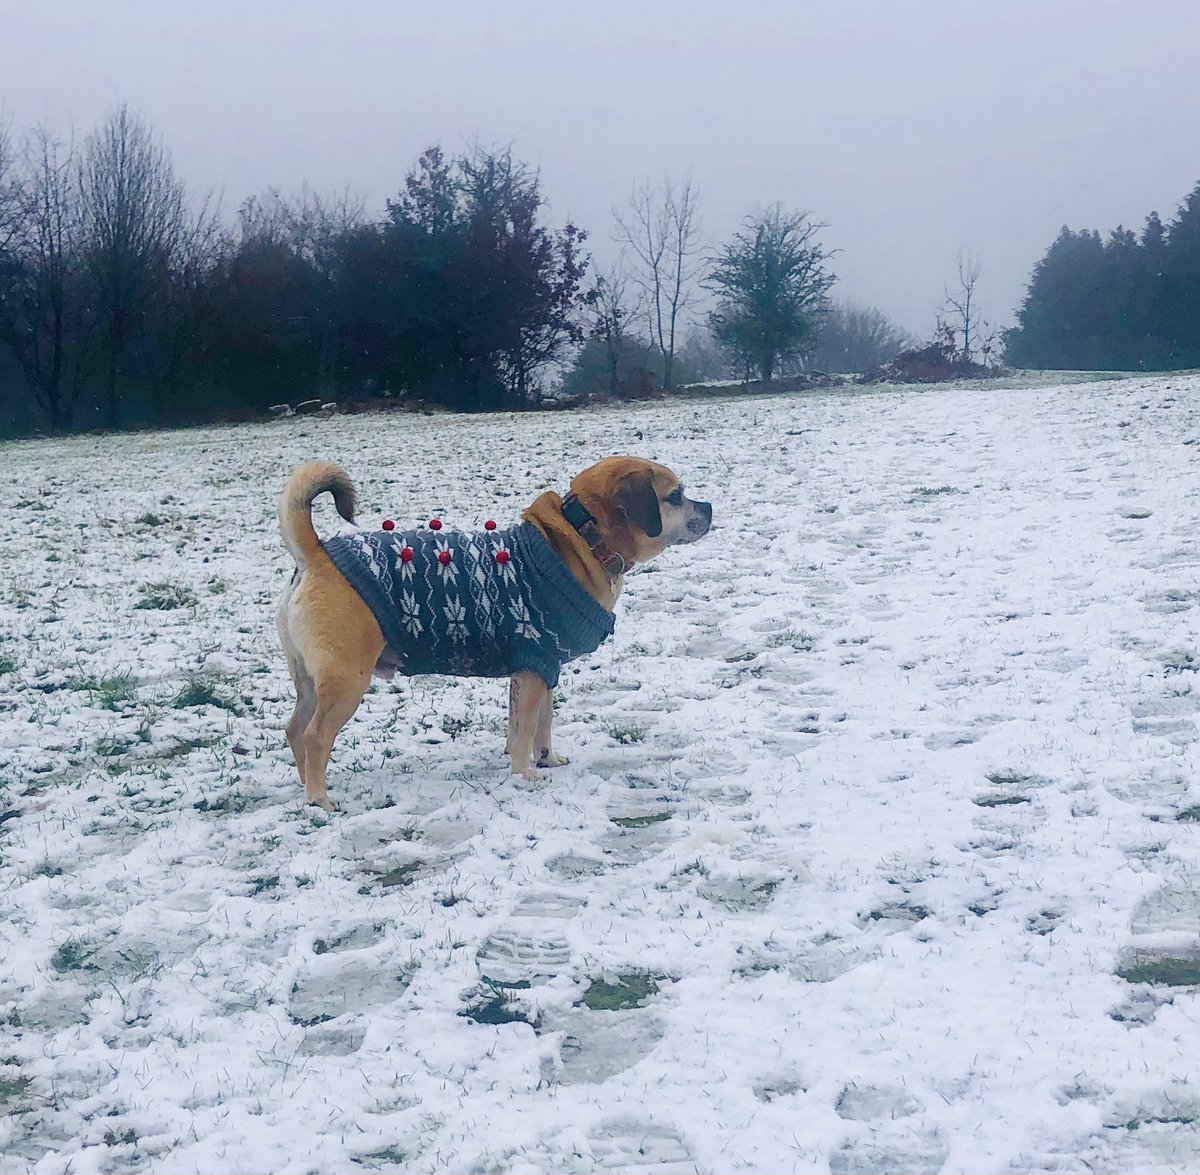 Keeping warm today in my Christmas jumper #staywarm #christmasjumpers #dogsoftwitter #snow